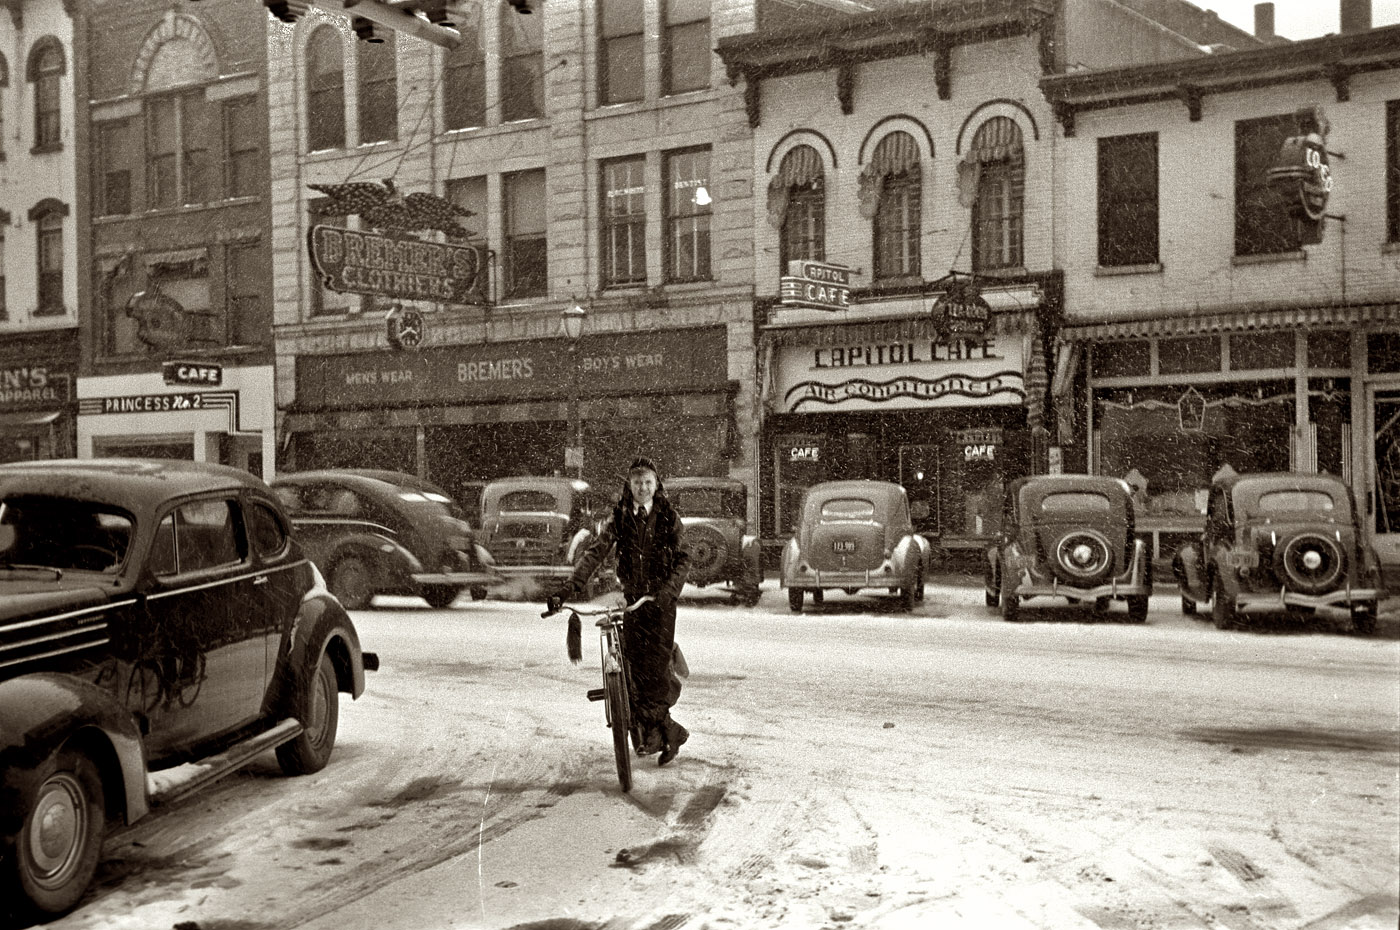 February 1940. The main street in Iowa City during a snowstorm. View full size. Businesses in this view include Bremer's, the Capitol Cafe and Princess No. 2. 35mm nitrate negative by Arthur Rothstein for the Farm Security Administration.